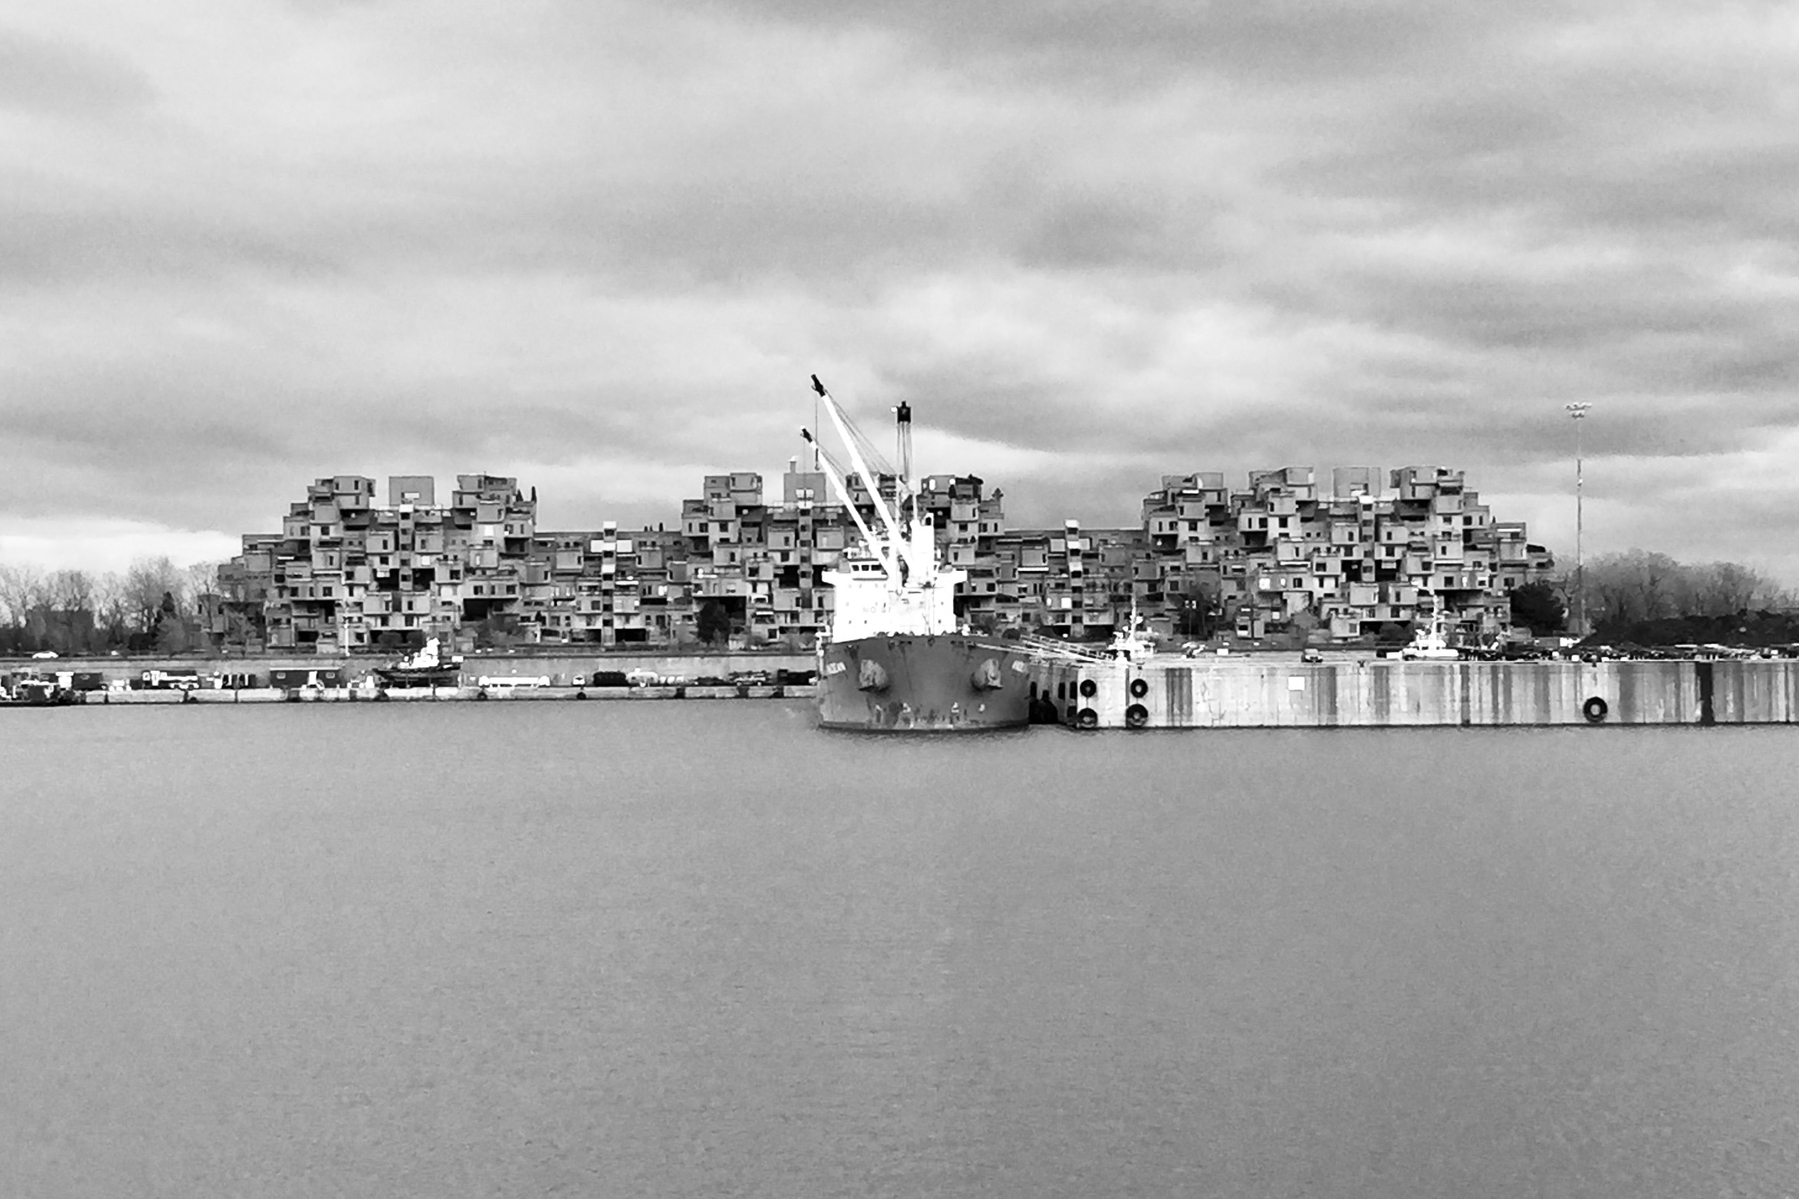 Habitat 67 in all its glory. One of the greatest piece of brutalist architecture ever built